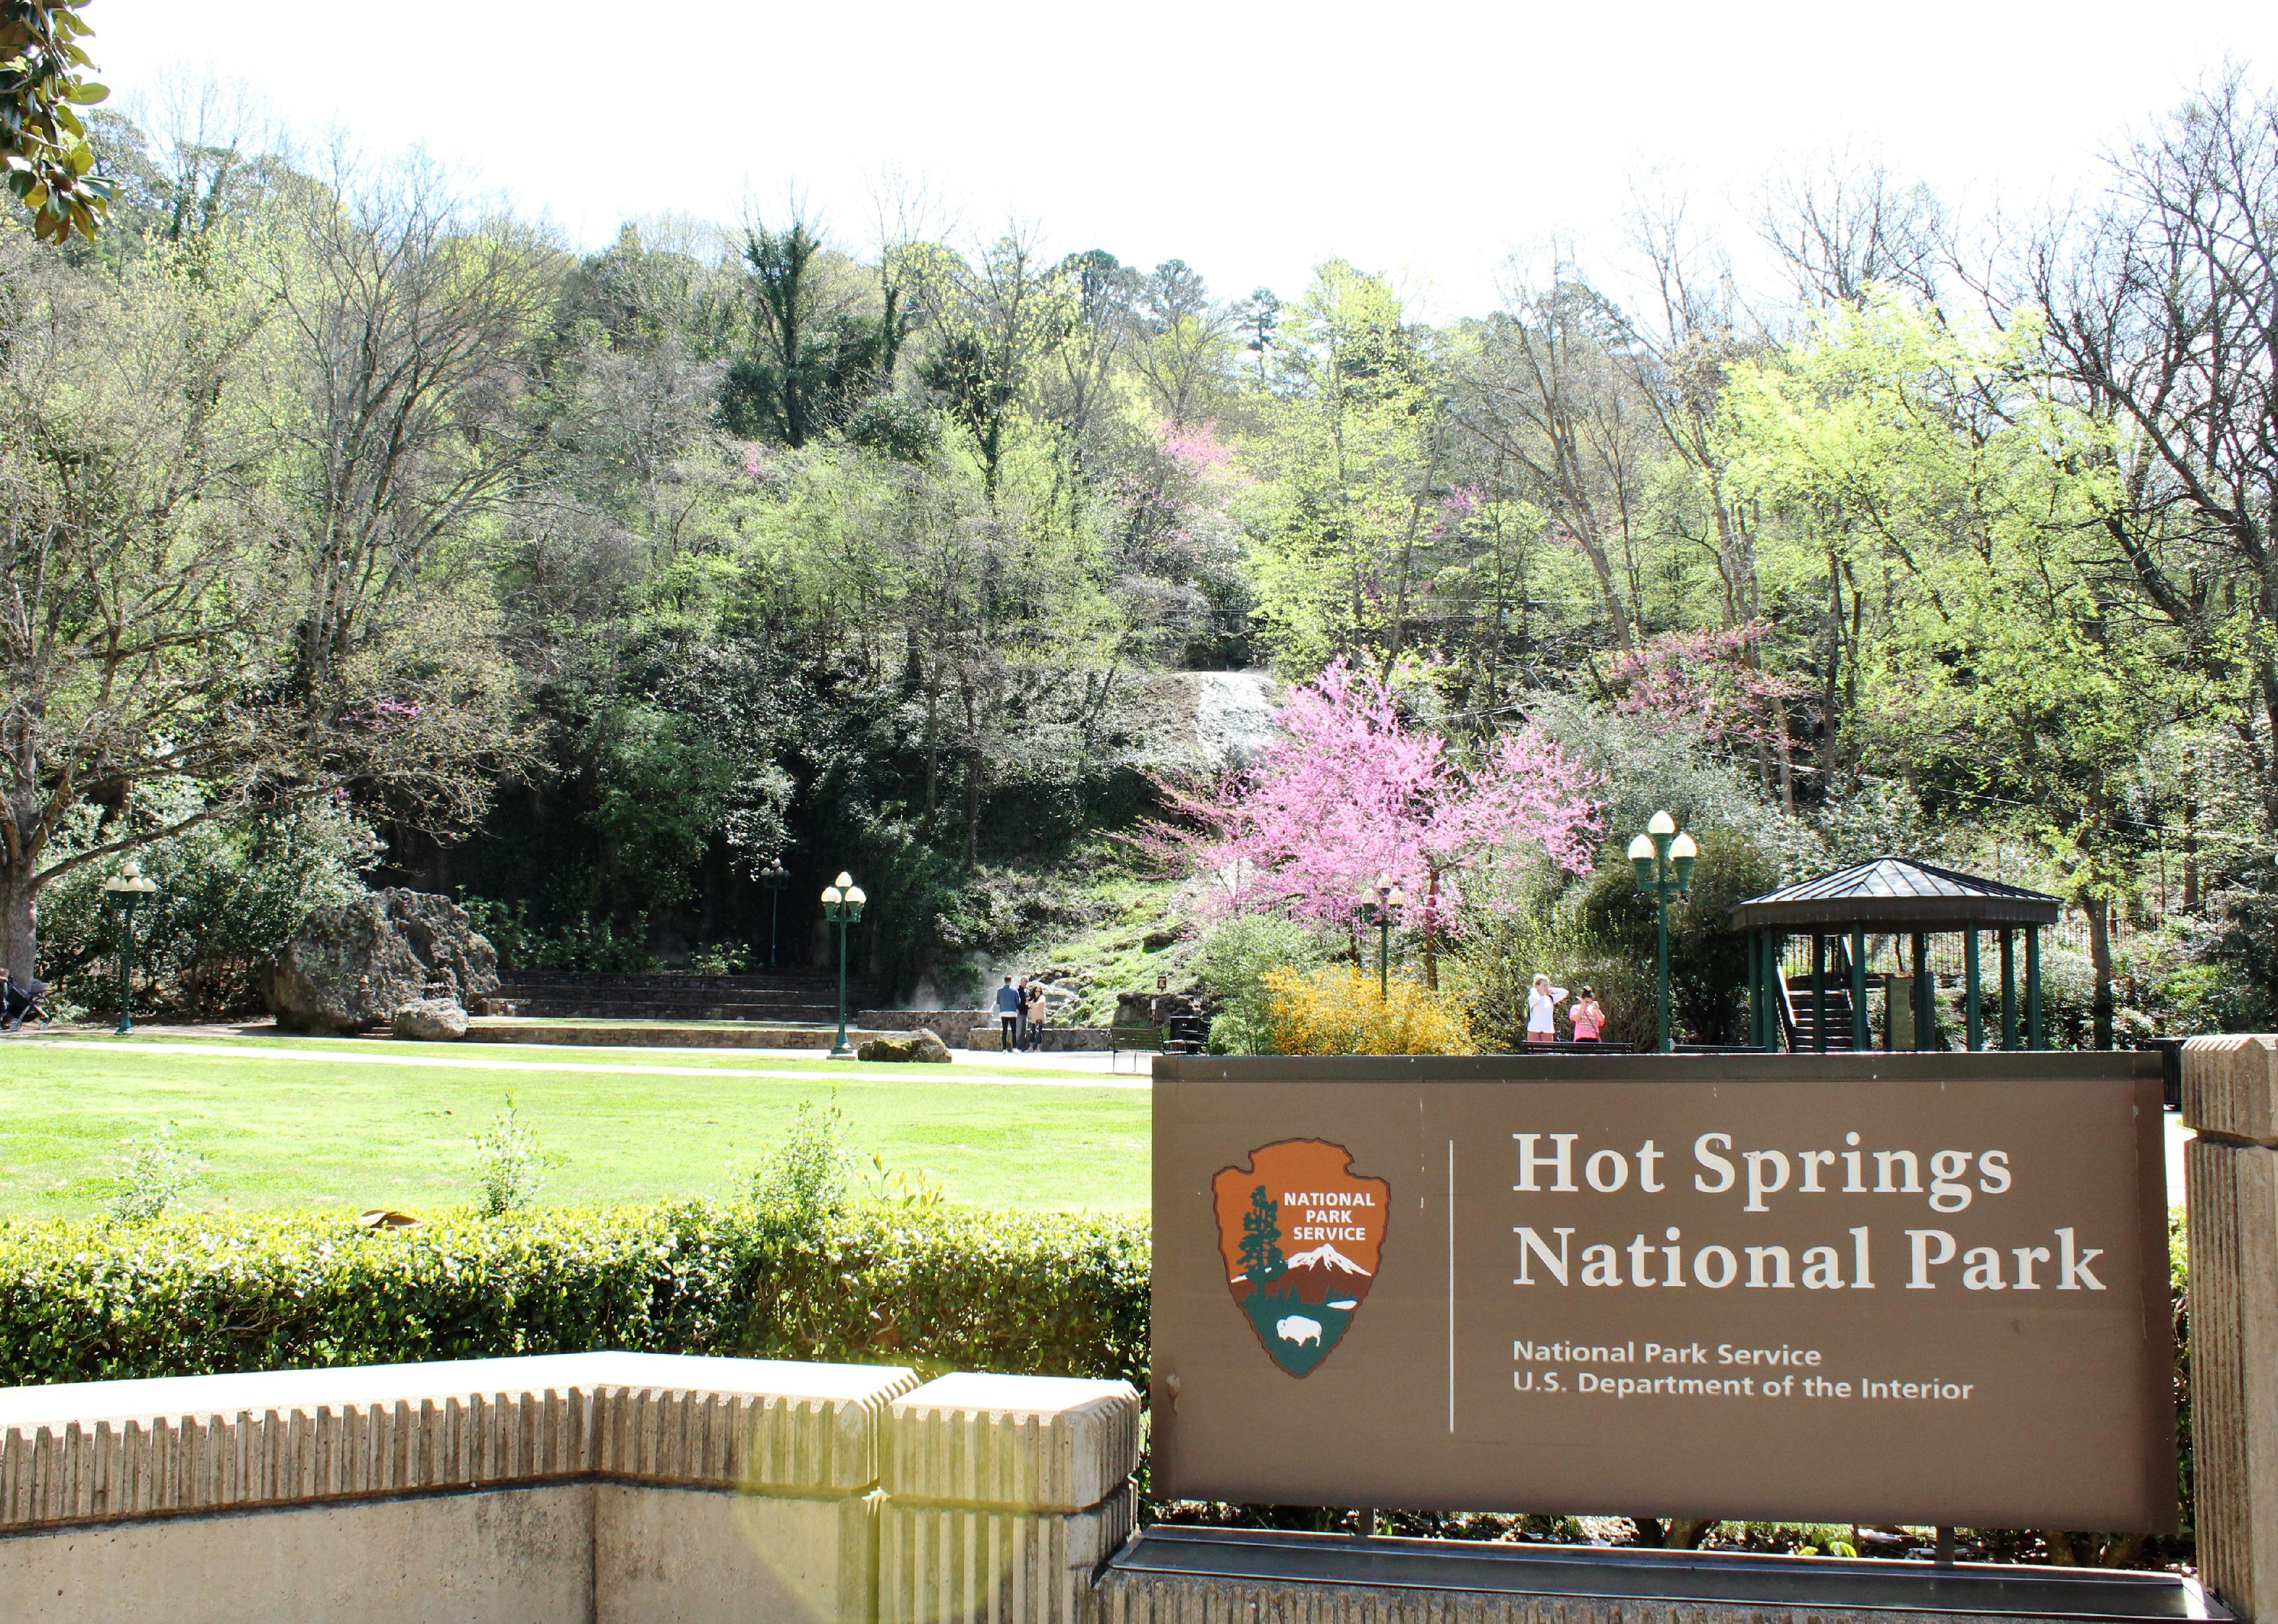 Sign in foreground greets visitors to Hot Springs National Park.